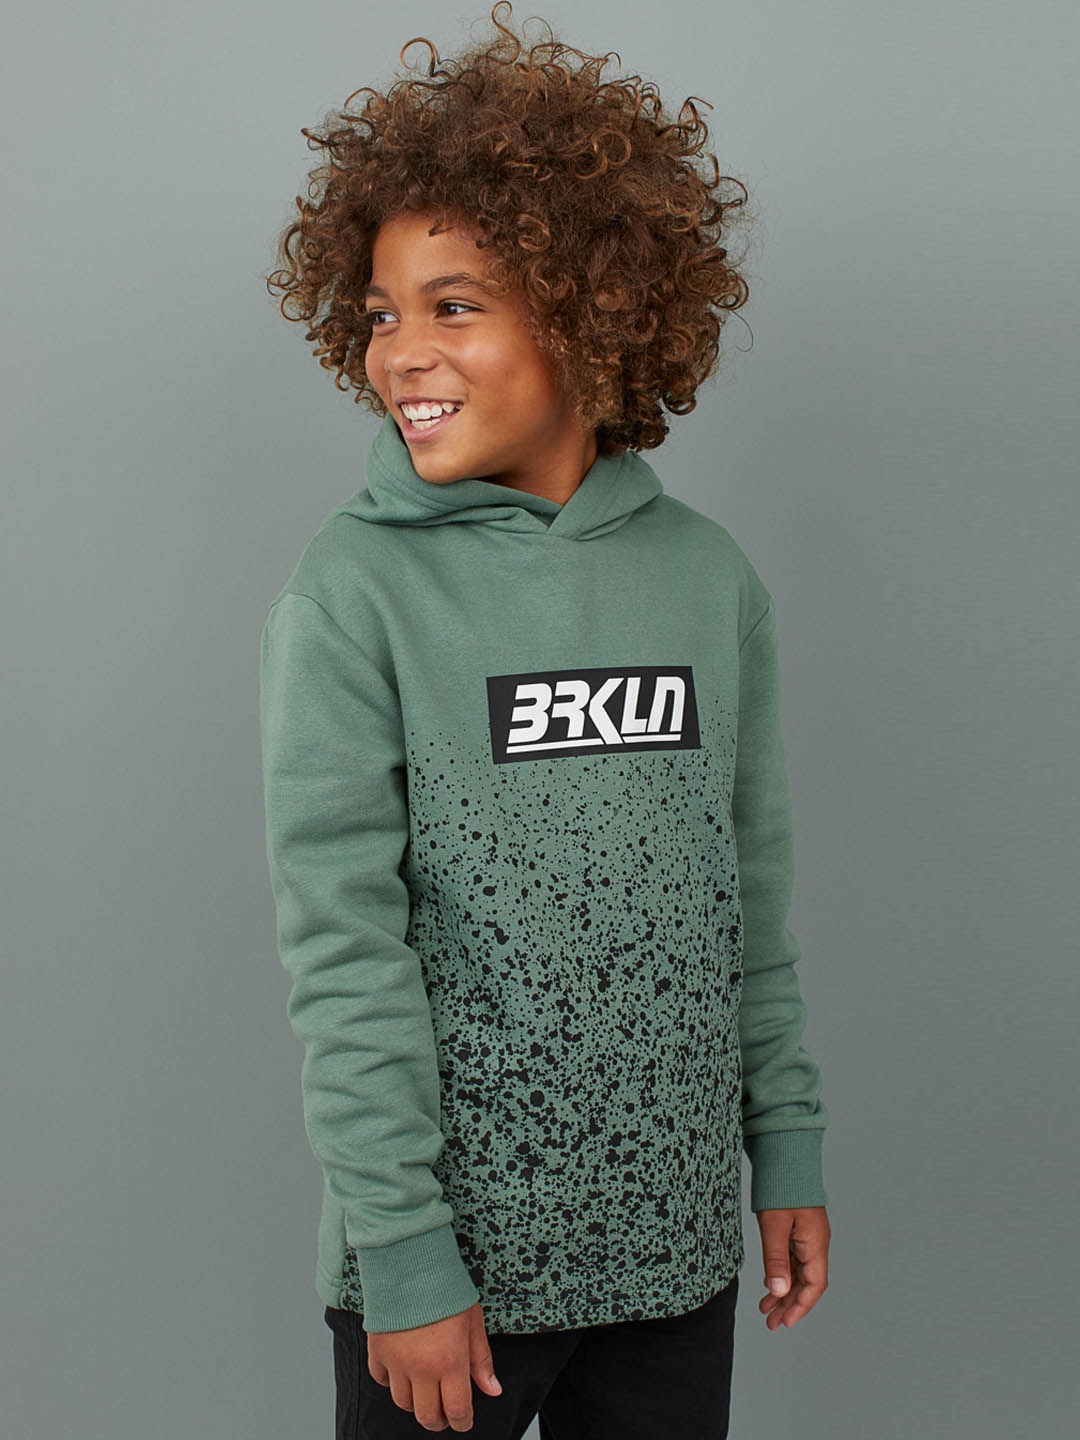 h and m ad. with black kid in green sweatshirt